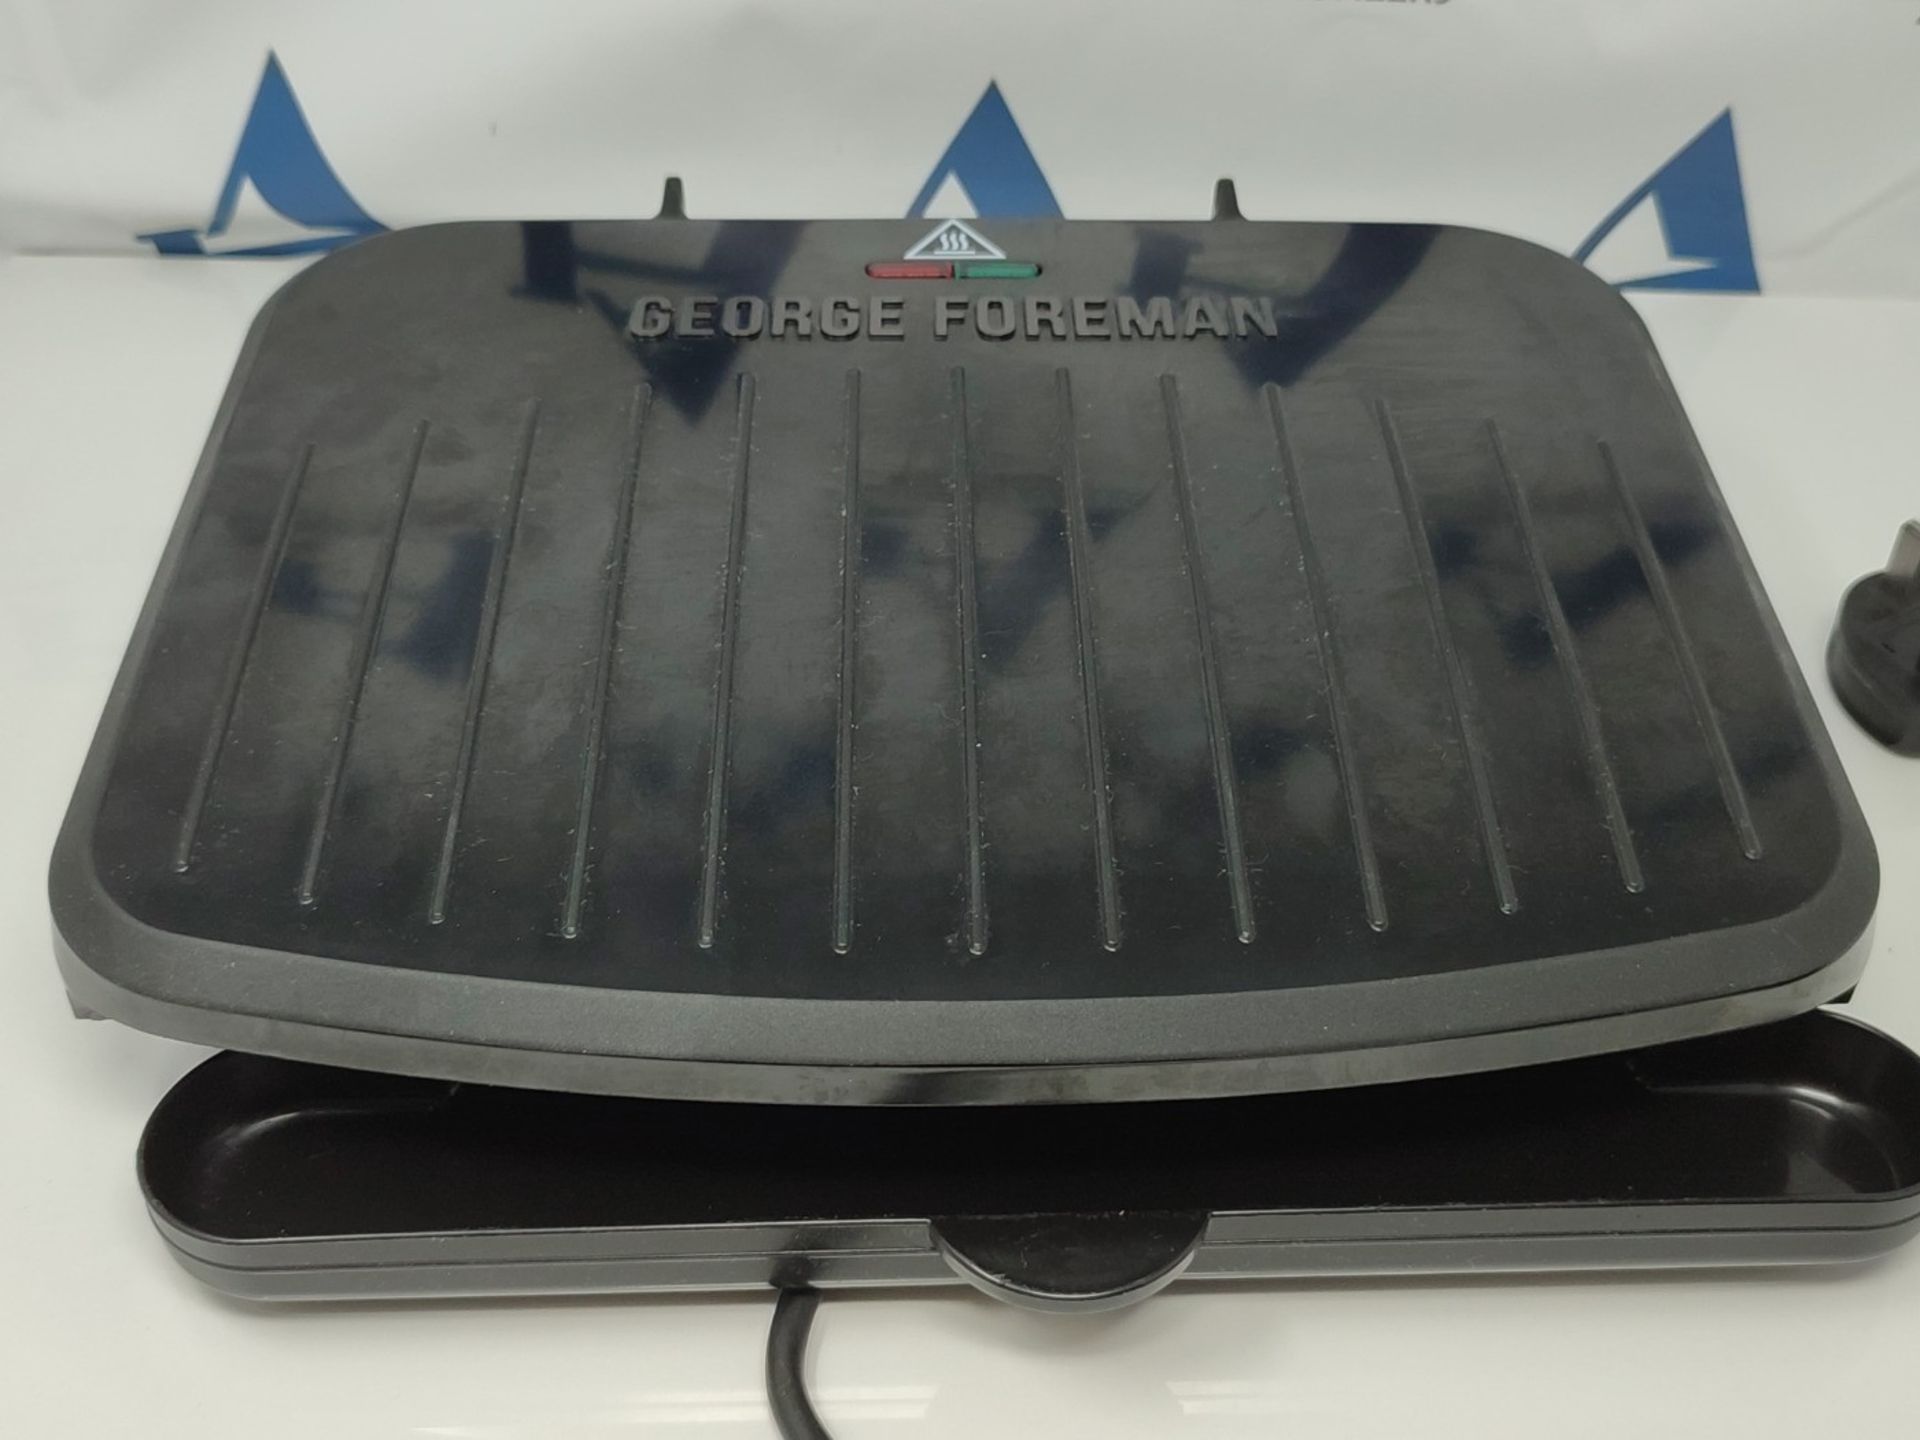 George Foreman 25810 Medium Fit Grill - Versatile Griddle, Hot Plate and Toastie Machi - Image 2 of 2